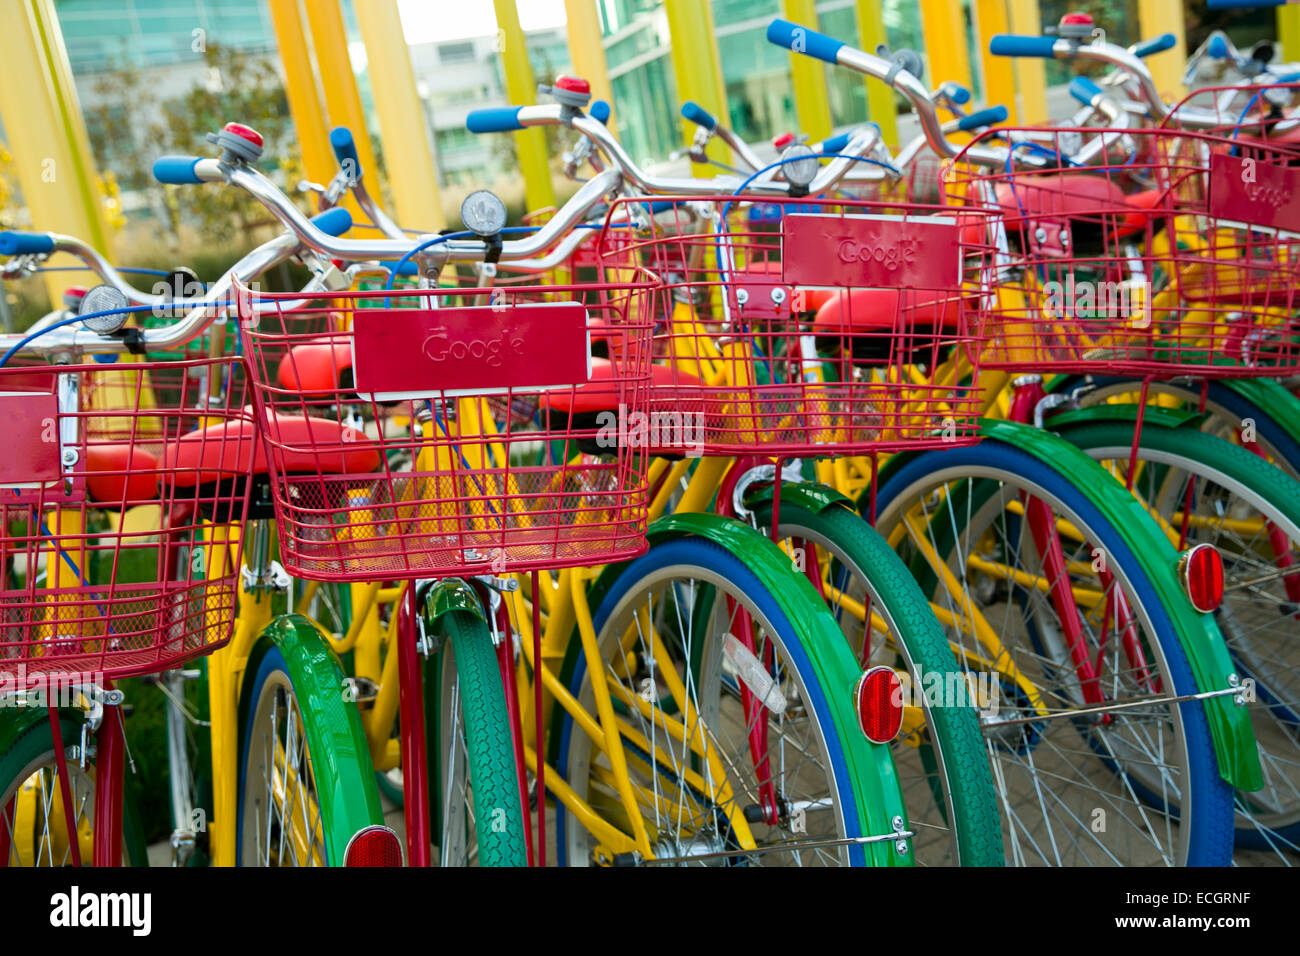 A large number of Google Gbike's. Stock Photo